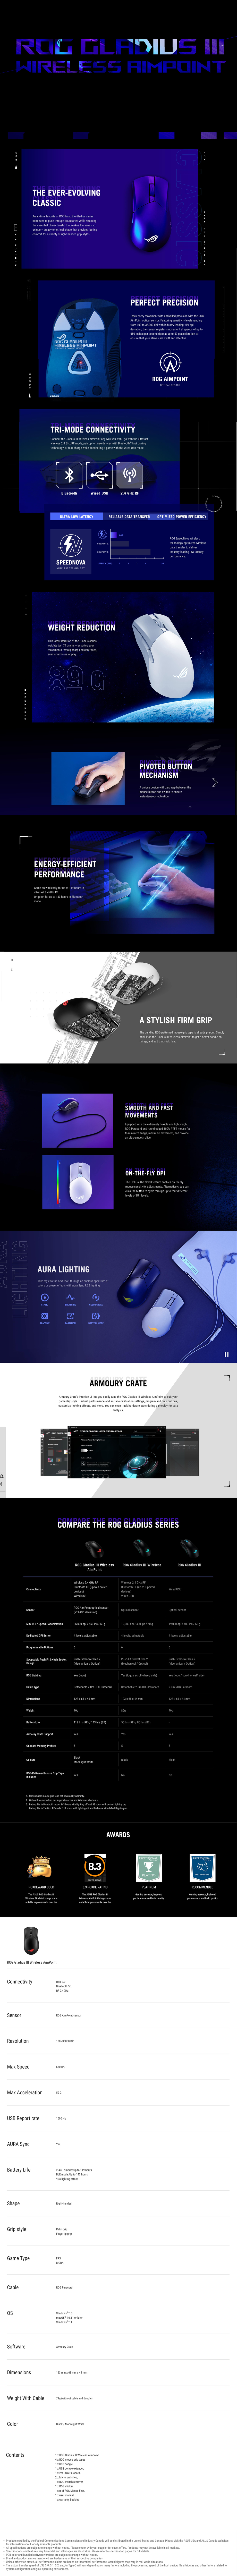 A large marketing image providing additional information about the product ASUS ROG Gladius III Wireless Aimpoint Gaming Mouse - Additional alt info not provided